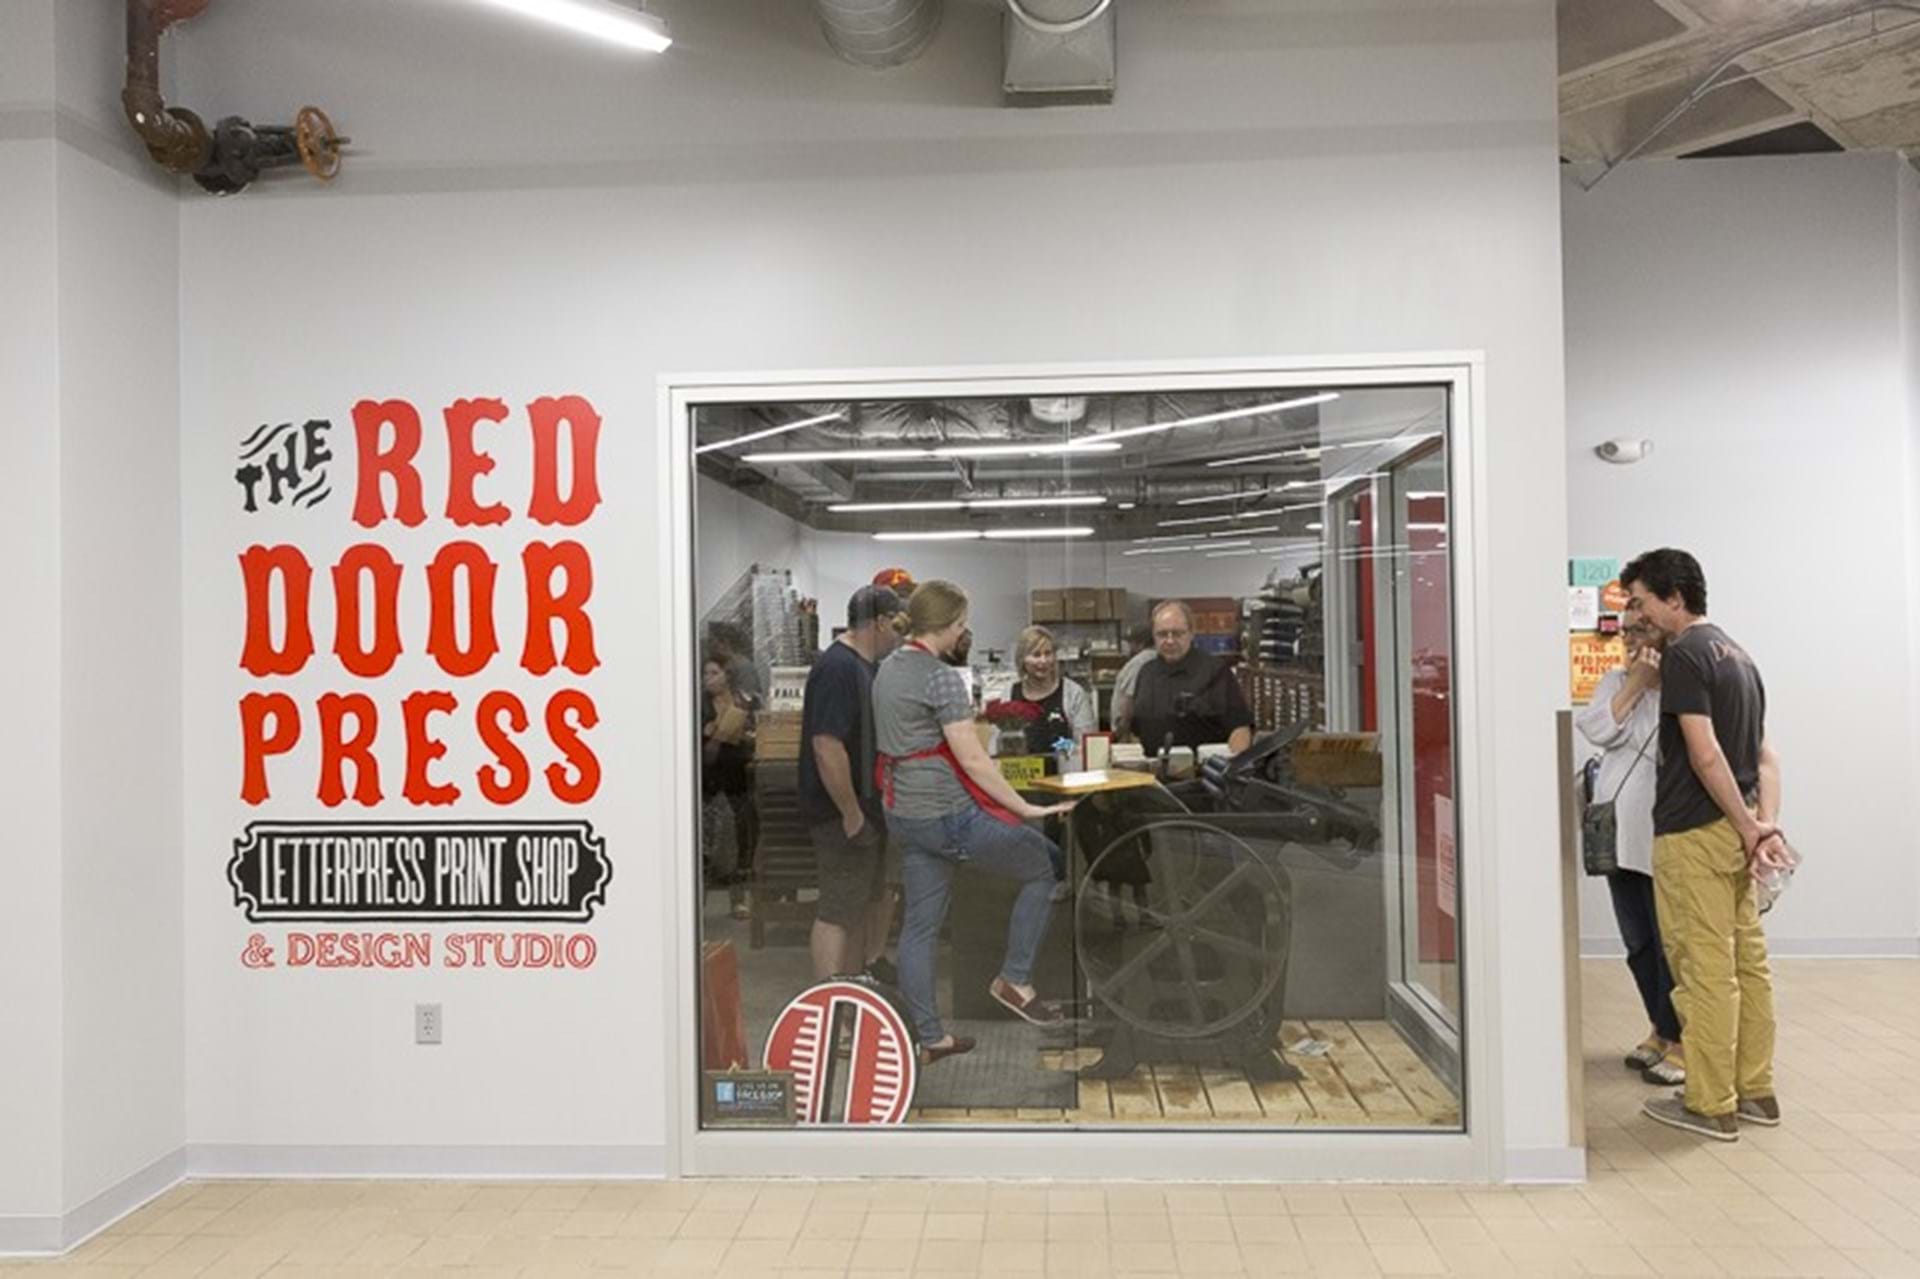 The Red Door Press is gaining national attention for reviving the art of letterpress printing